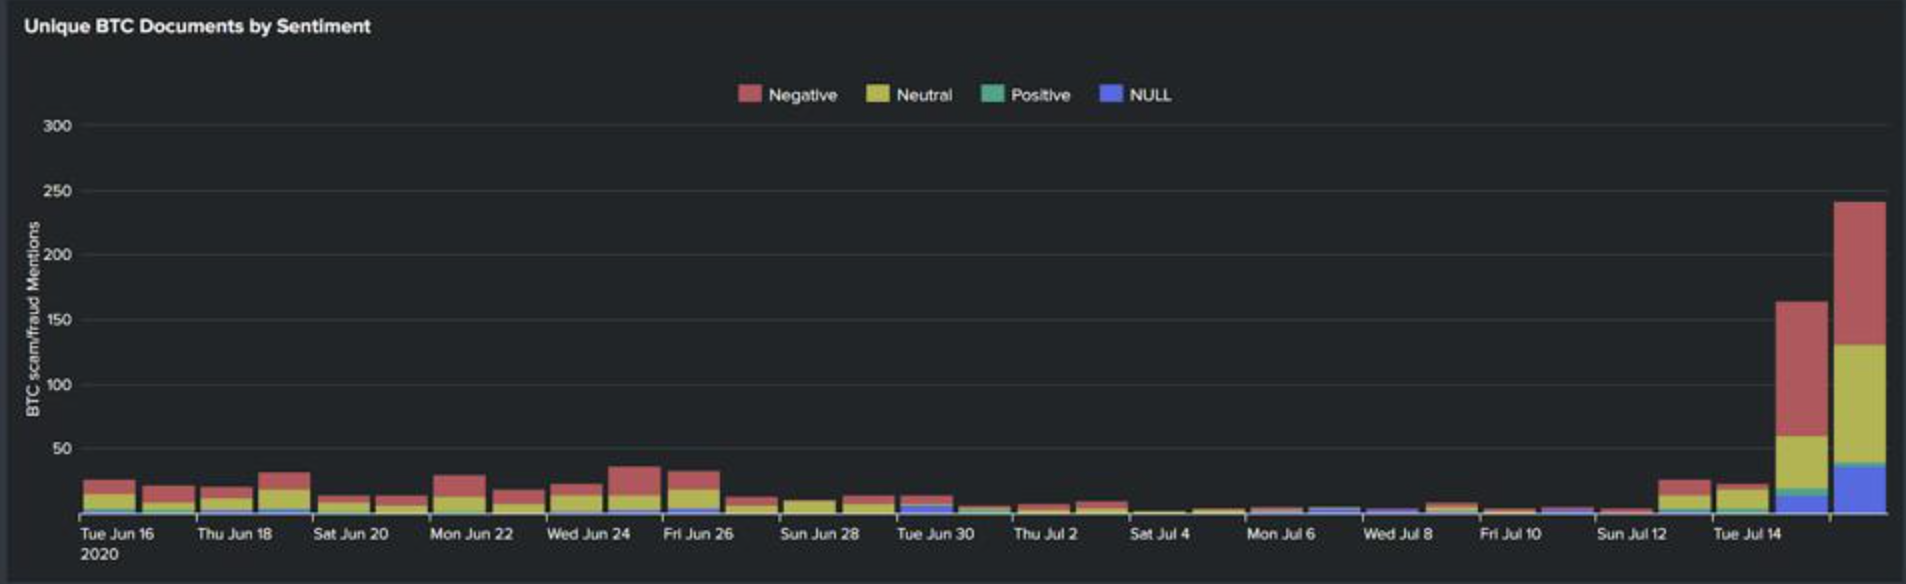 Bitcoin Scam/Hack timeseries data from June 16th to July 16th 2020. Source: <a href="https://inca.digital/products#data">Inca Digital</a> data in Splunk